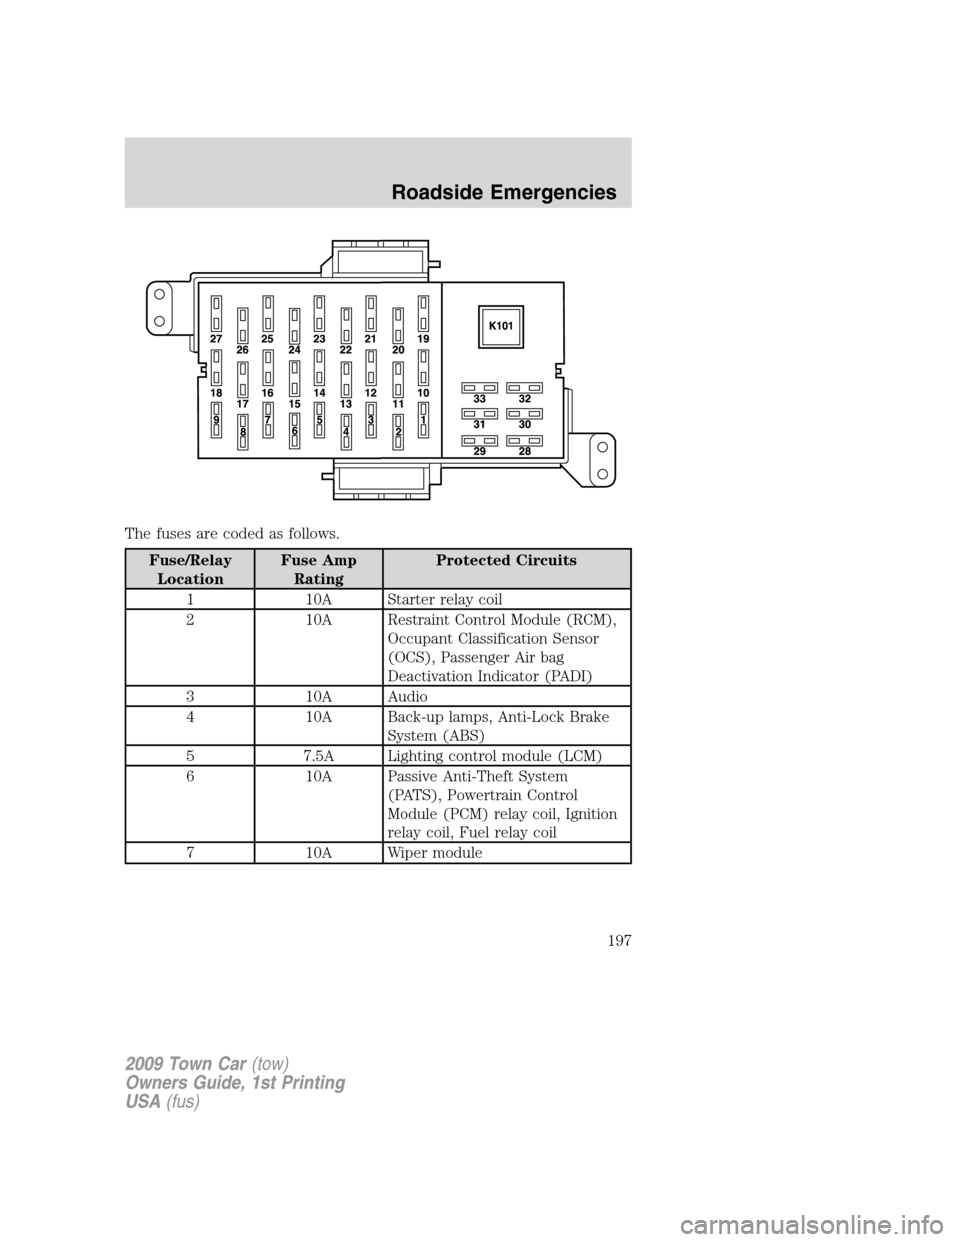 LINCOLN TOWN CAR 2009  Owners Manual The fuses are coded as follows.
Fuse/Relay
LocationFuse Amp
RatingProtected Circuits
1 10A Starter relay coil
2 10A Restraint Control Module (RCM),
Occupant Classification Sensor
(OCS), Passenger Air 